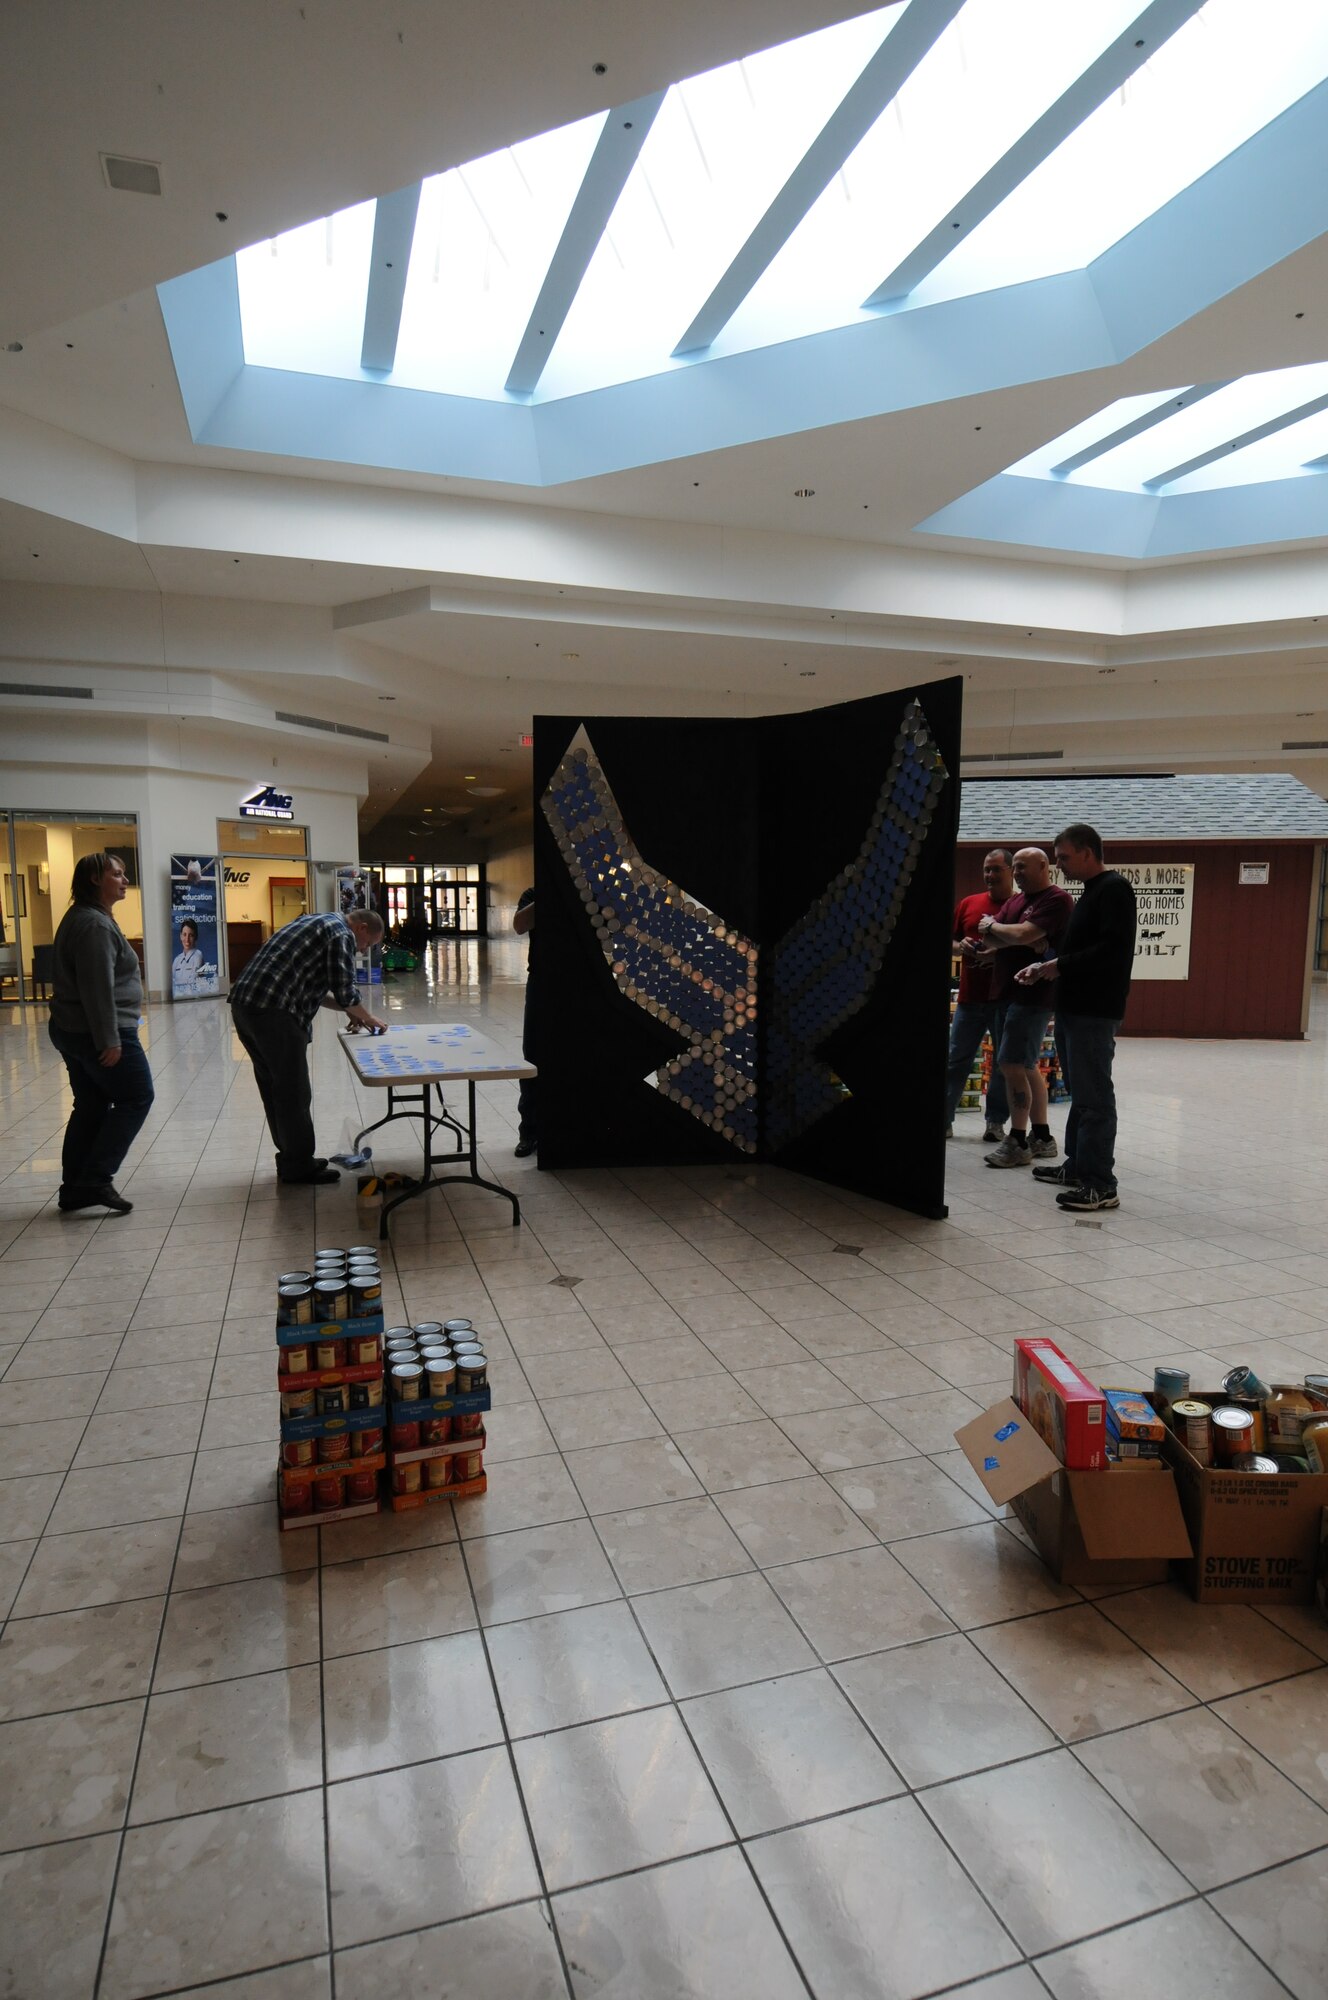 Servicemembers from the 110th Airlift Wing, Battle Creek Air National Guard Base and their families participate in the local food drive Canned Sculpture Exhibit held at Lakeview Square Mall, Battle Creek, Mich., on Sunday, April 22, 2012. A donation of over $600 was collected toward the sculpture equaling over a 1,000 cans. All food collected is donated to the Food Bank of South Central Michigan. Sculptures will be on display until Sunday, May 6, 2012. (U.S. Air National Guard Photo by Master Sgt. Sonia Pawloski/Released)